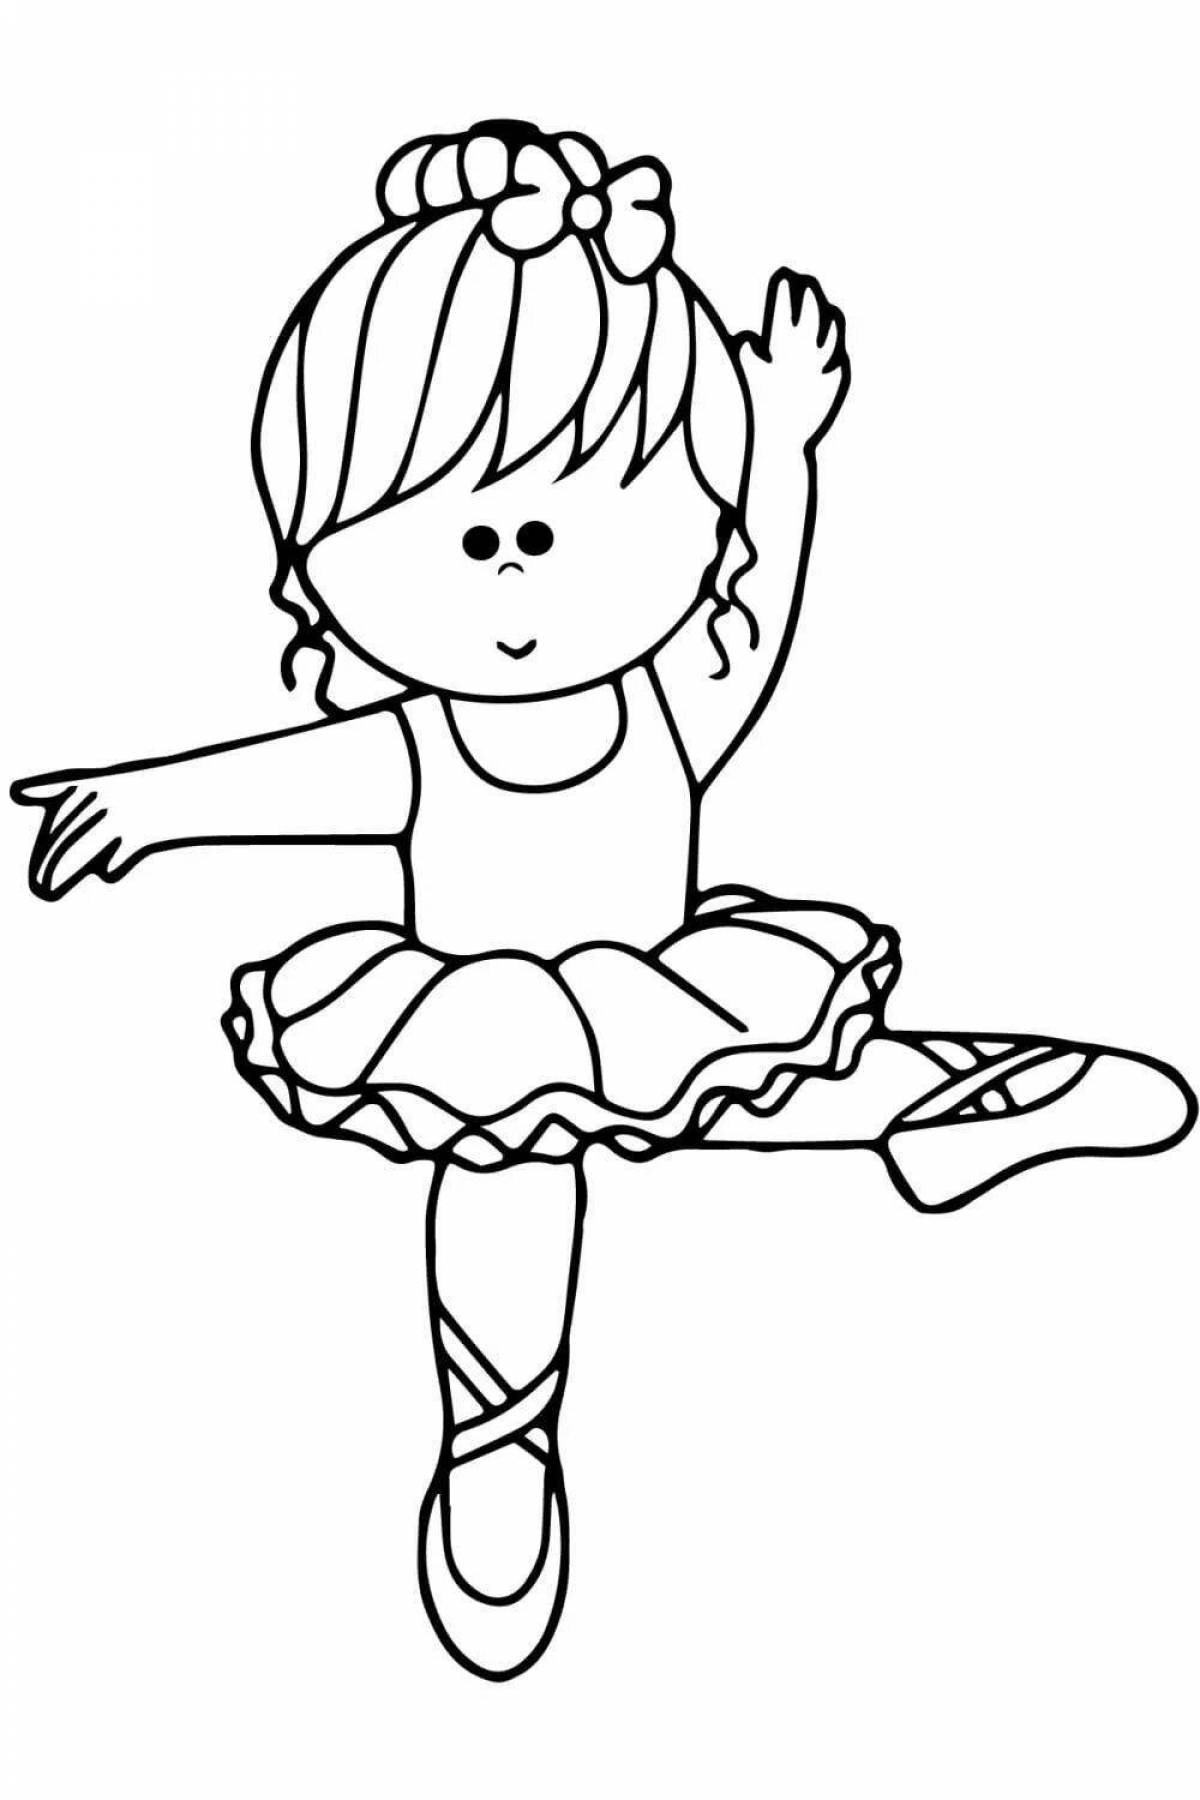 Coloring page shining dancer